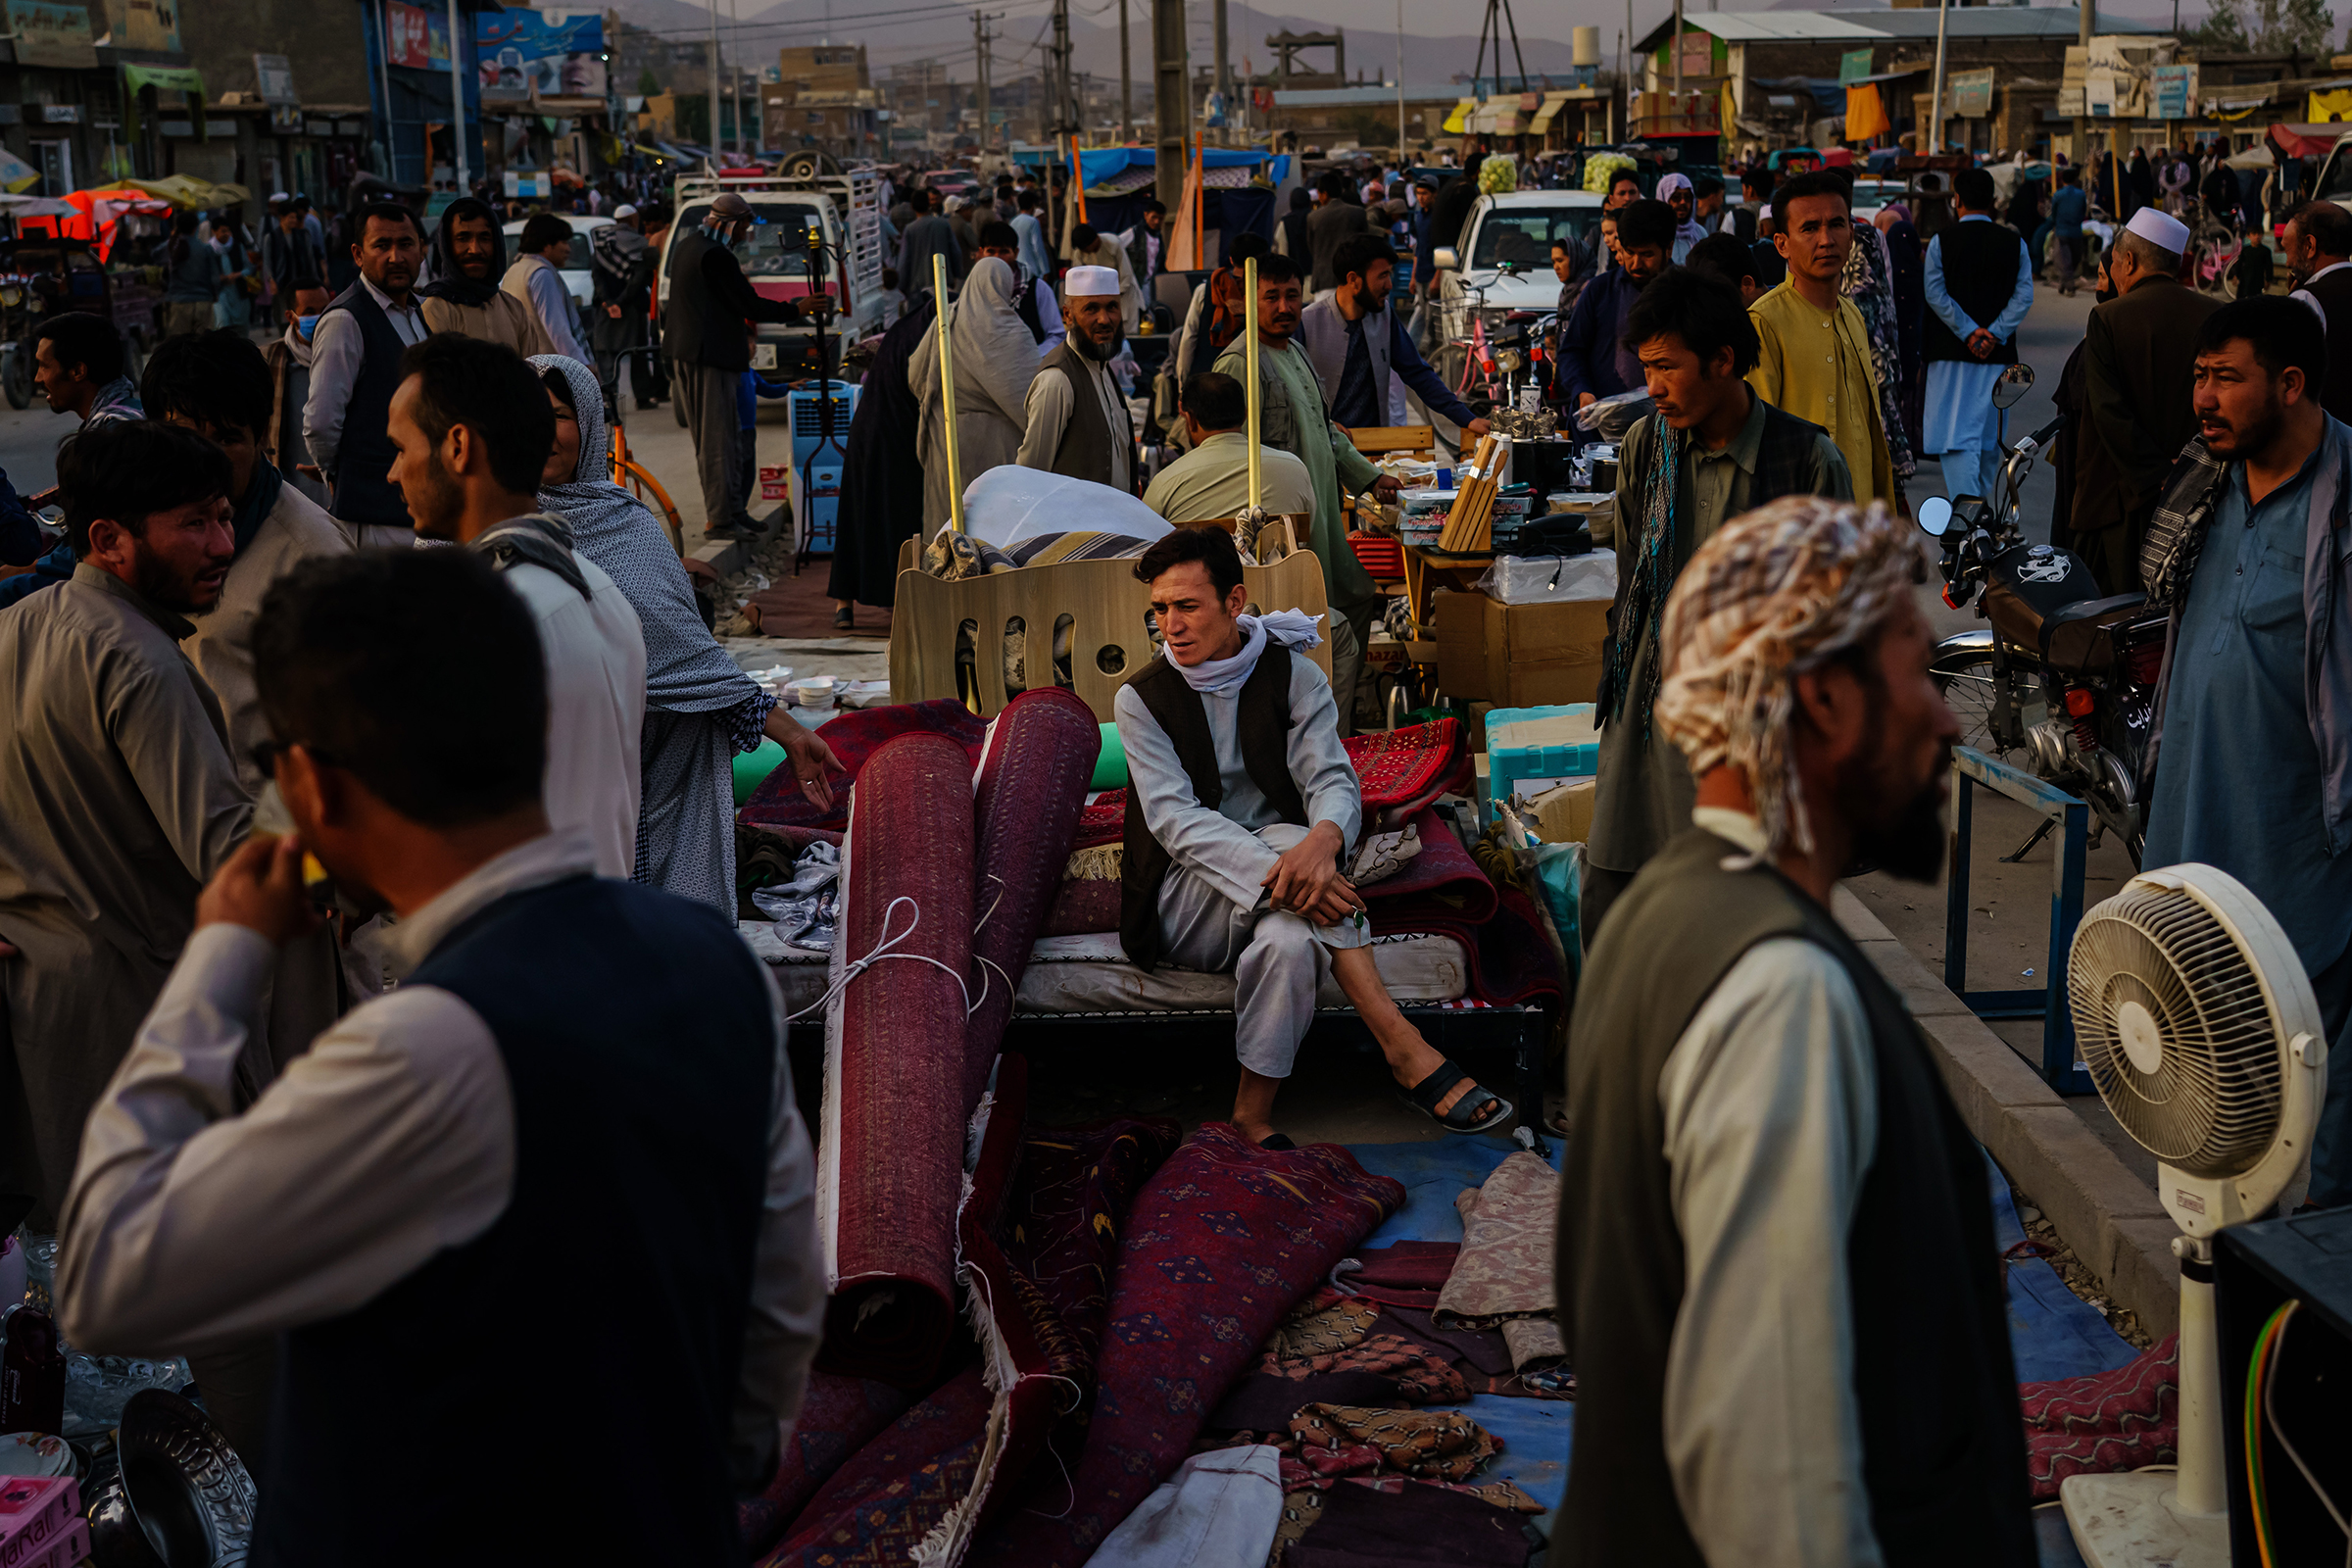 Afghans sell their personal belongings to raise money, citing unemployment, starvation and needing funds to leave the country, in Kabul on Sept. 20, 2021. (Marcus Yam—Los Angeles Times/Getty Images)